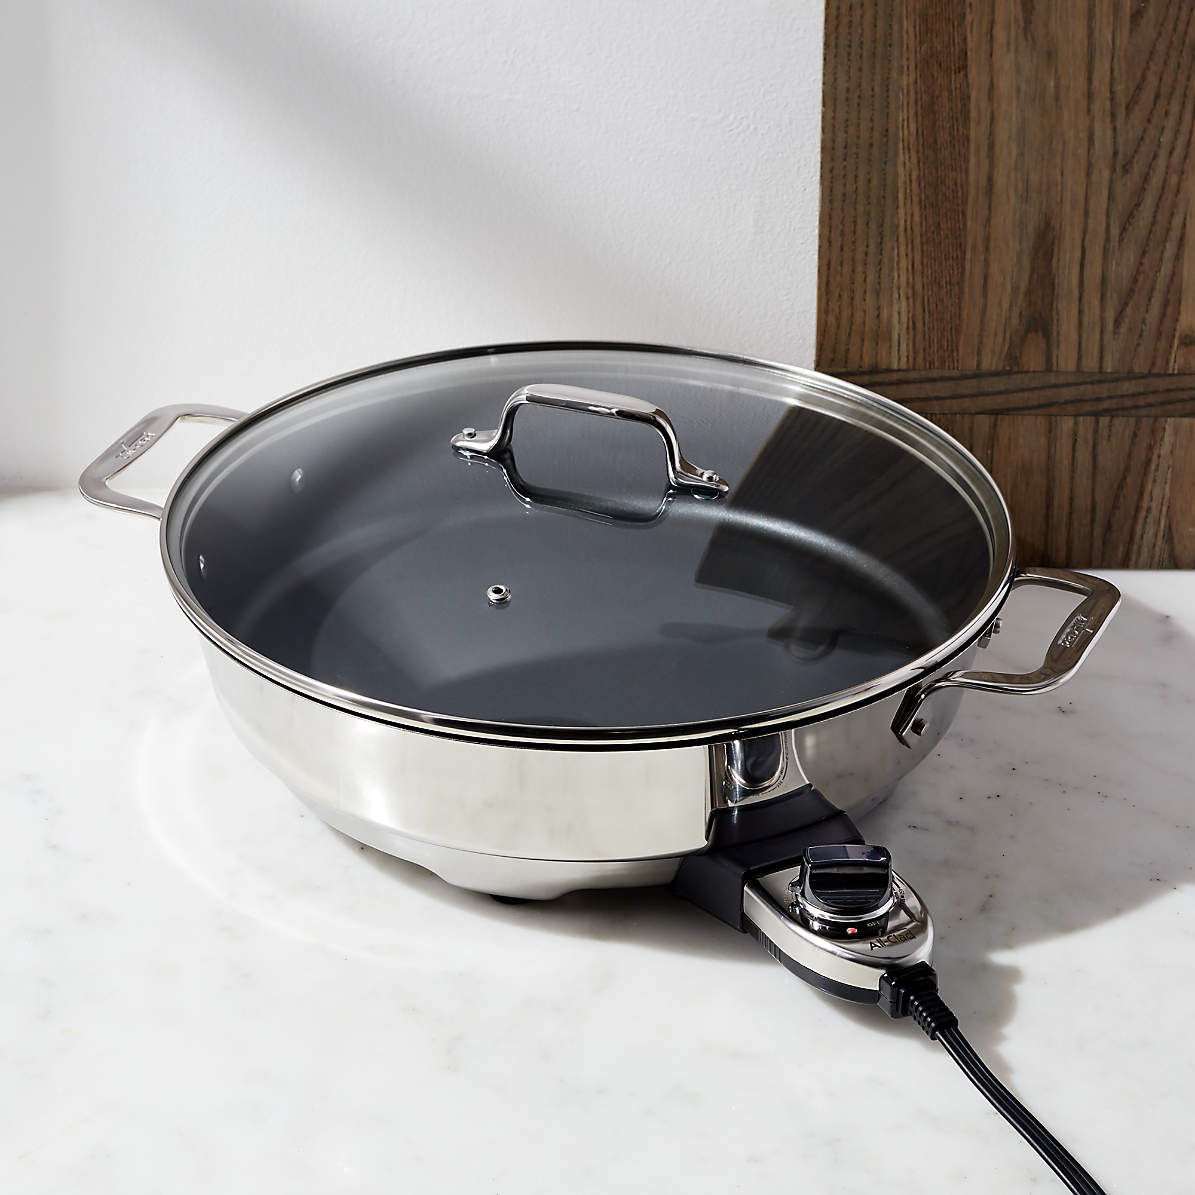 16-Inch Electric Skillet - Rectangular Stainless-Steel Pan with